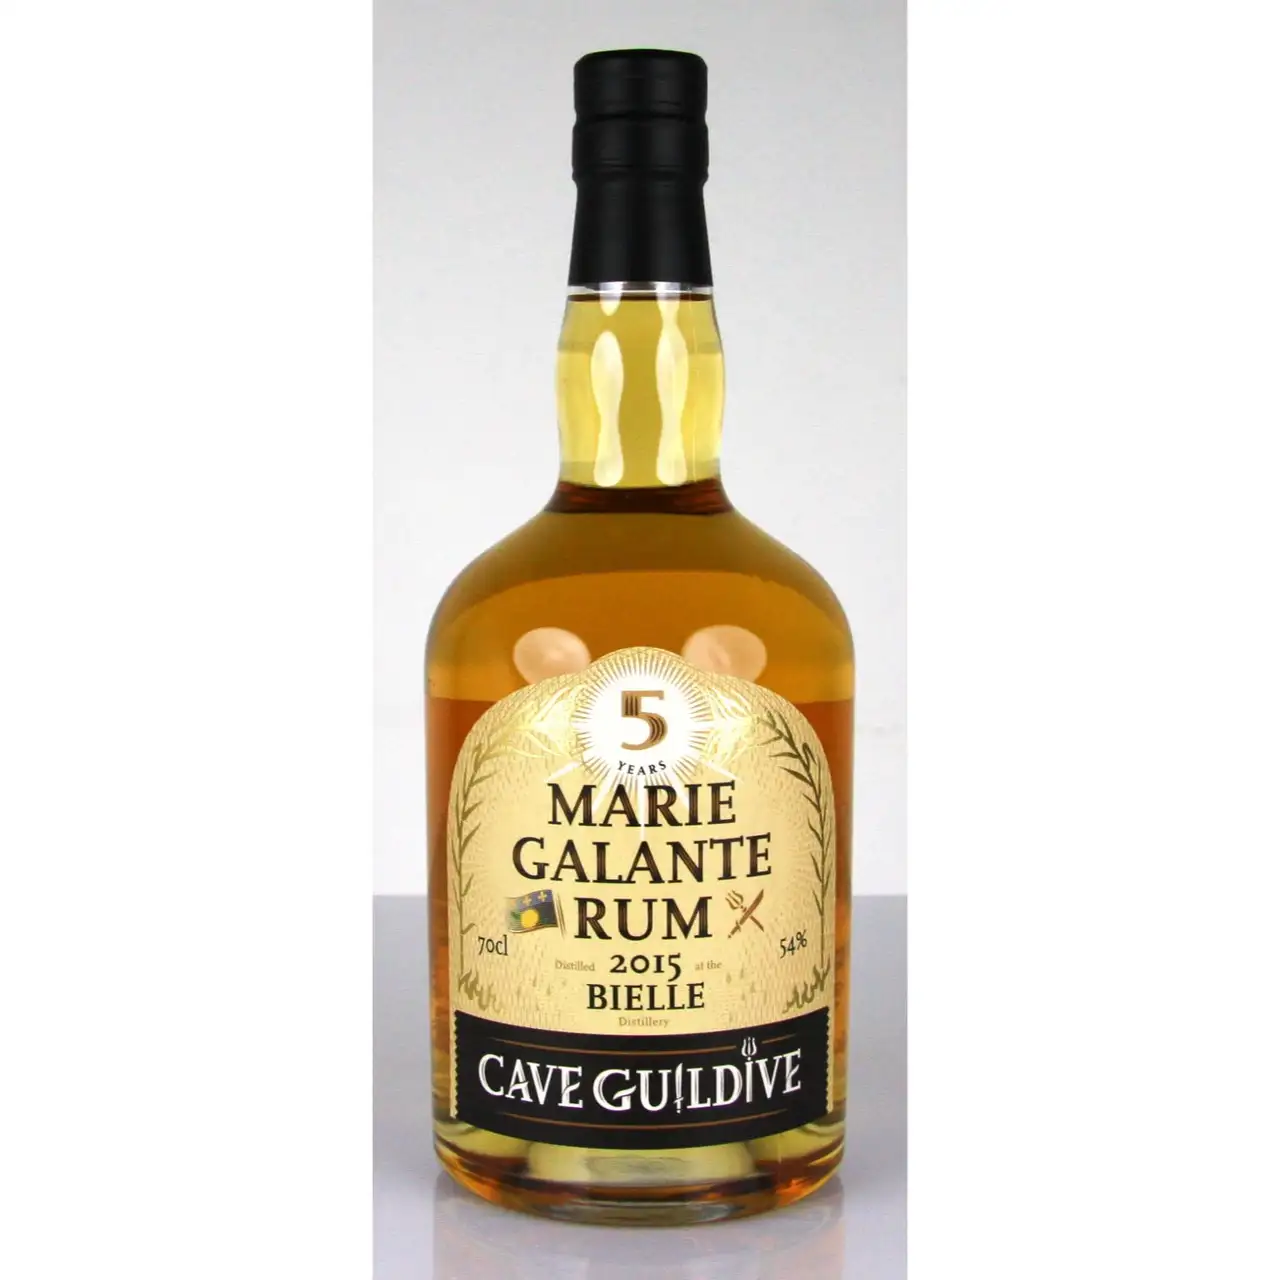 Image of the front of the bottle of the rum Marie Galante Rum